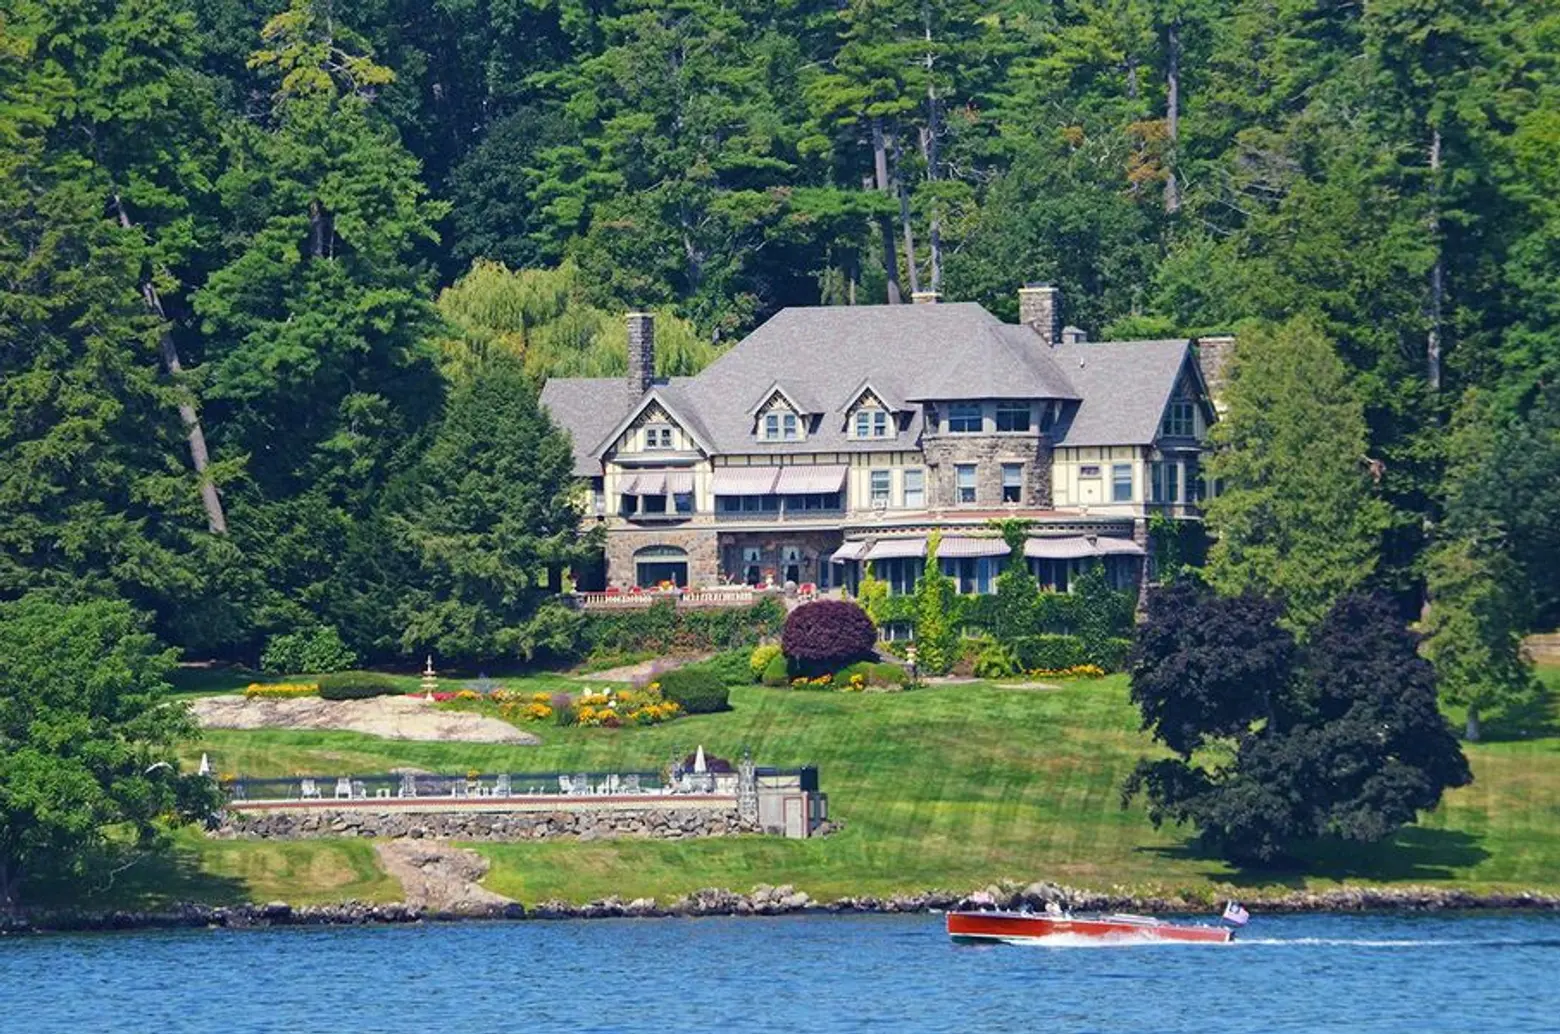 $13M Tudor Revival Mansion on Lake George Has Historic Connection to Brooklyn